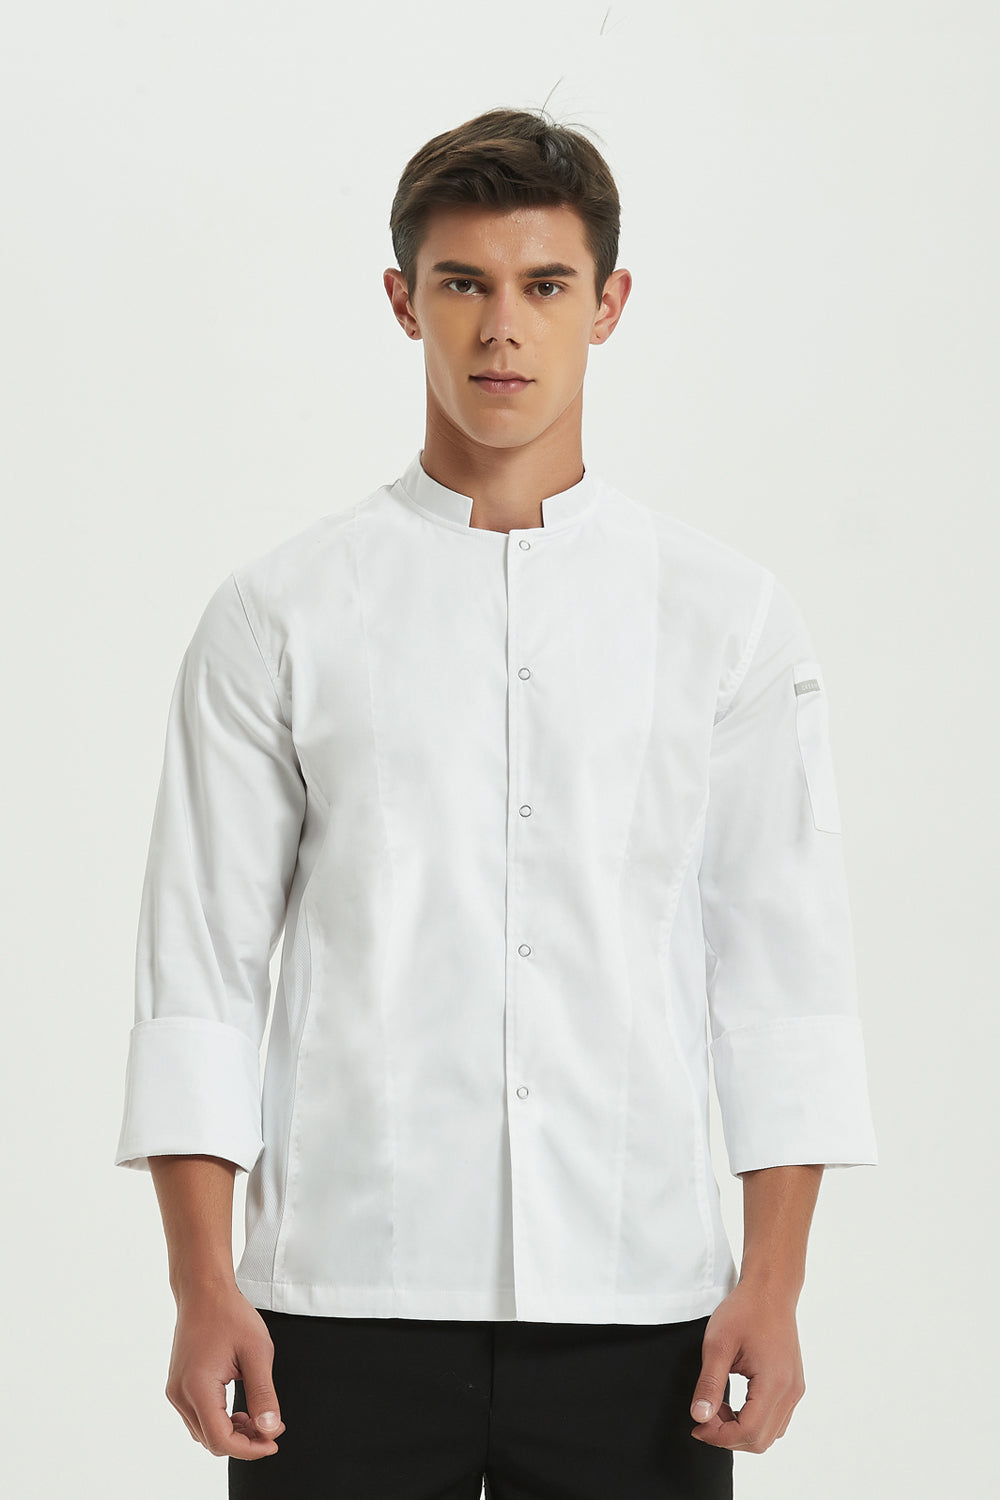 Mint White Chef Jacket with Dri-fit